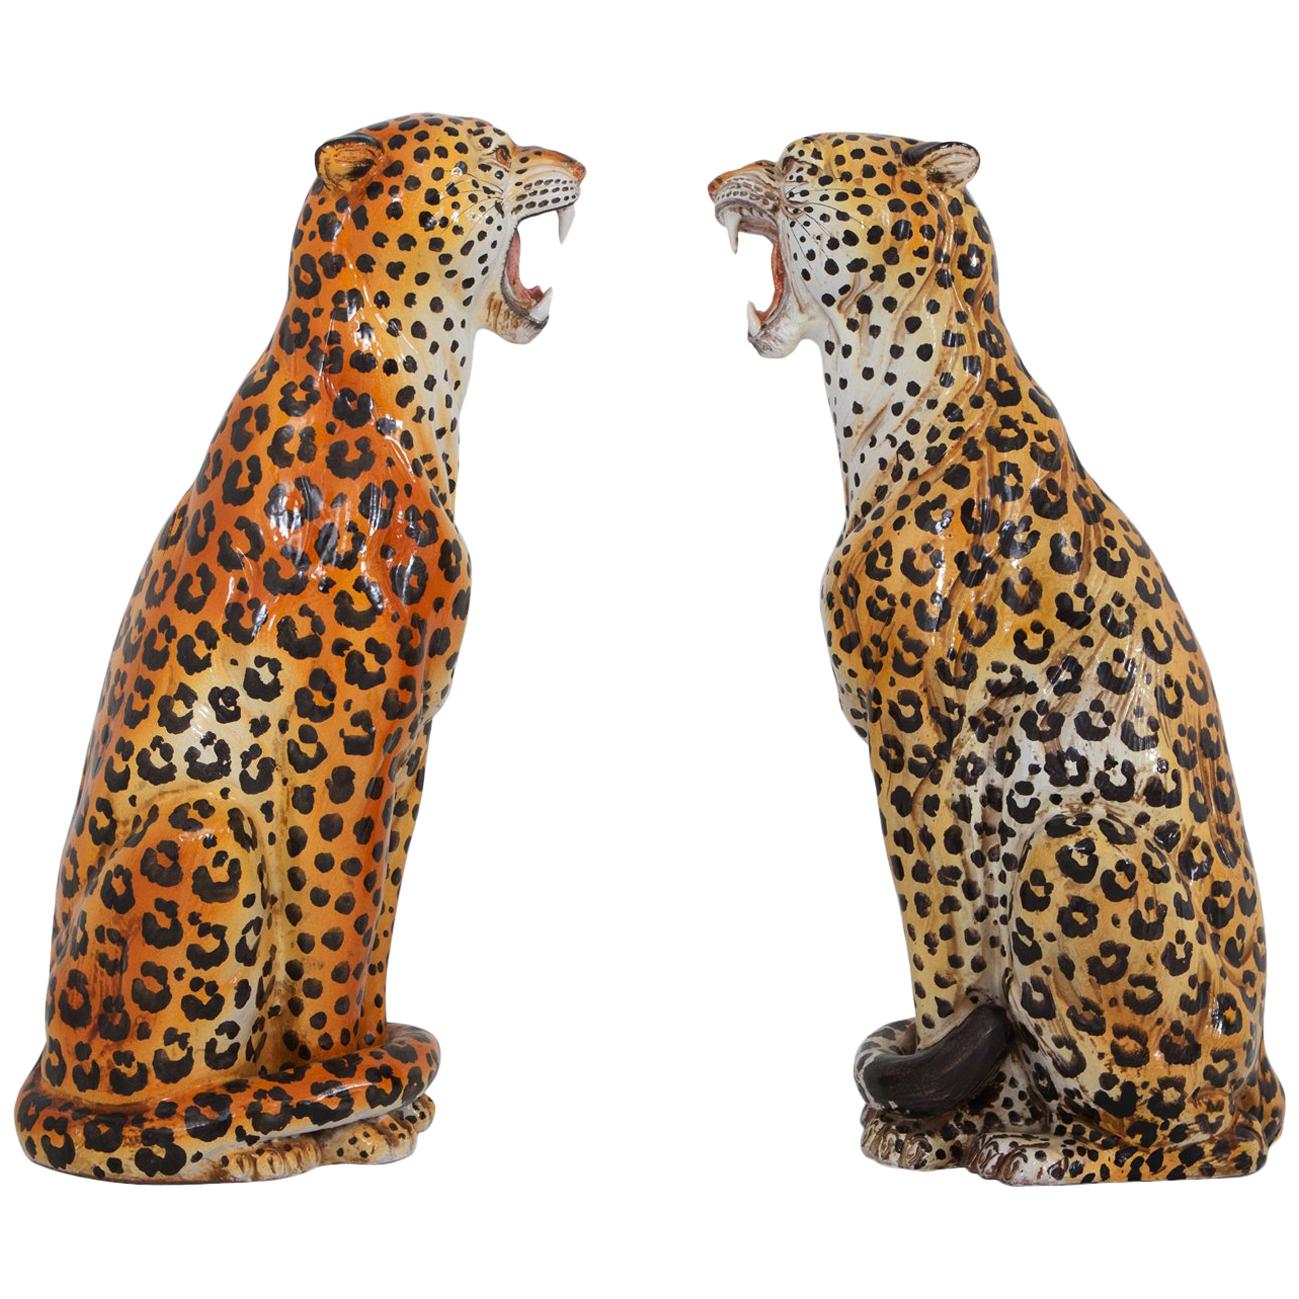 Leopard Ceramic Hand-Painted Sculptures from Italy, 1950s